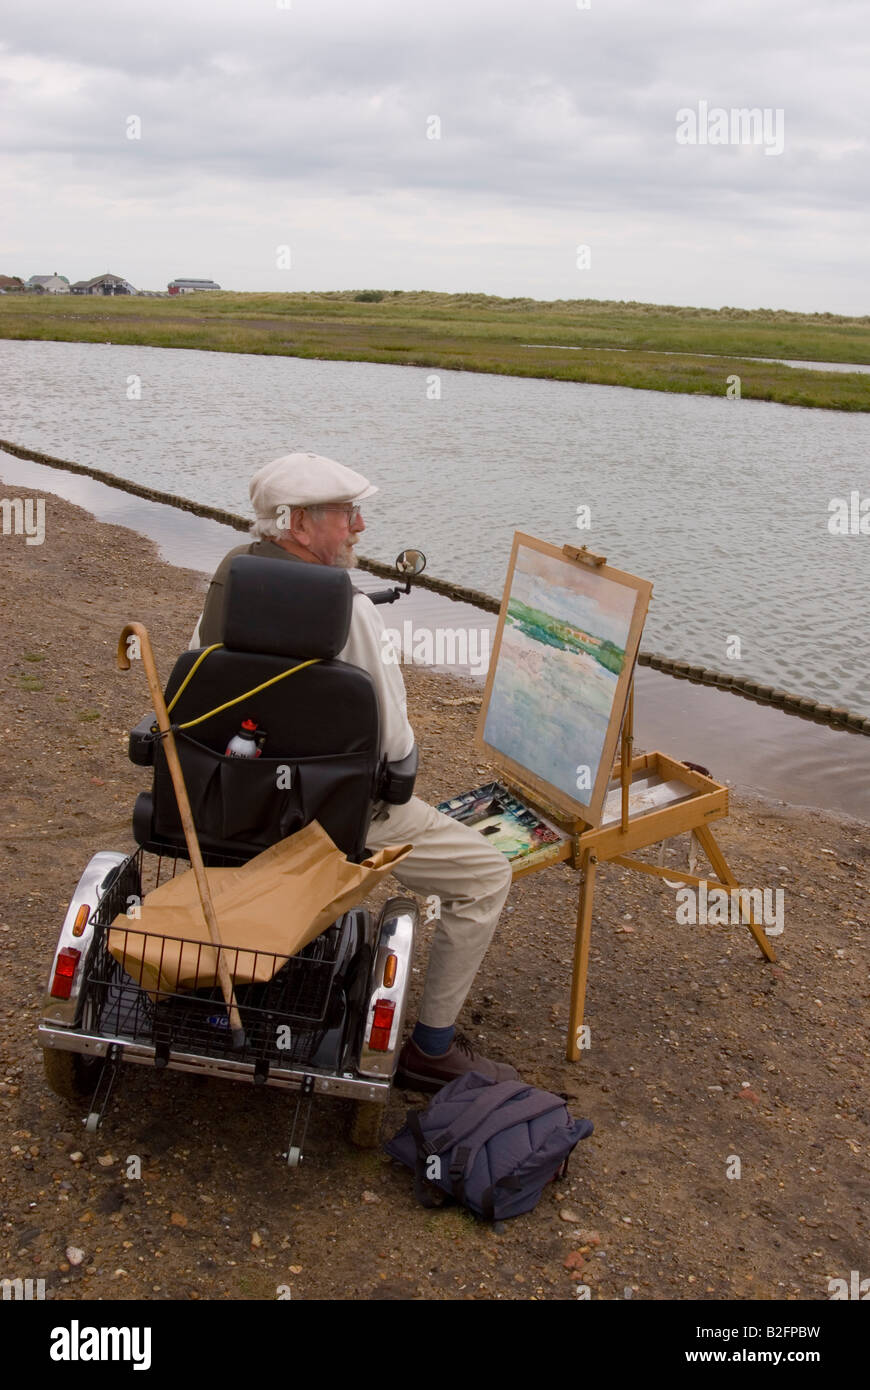 An elderly man on a mobility scooter  Painting A Landscape At Walberswick,Suffolk,Uk Stock Photo